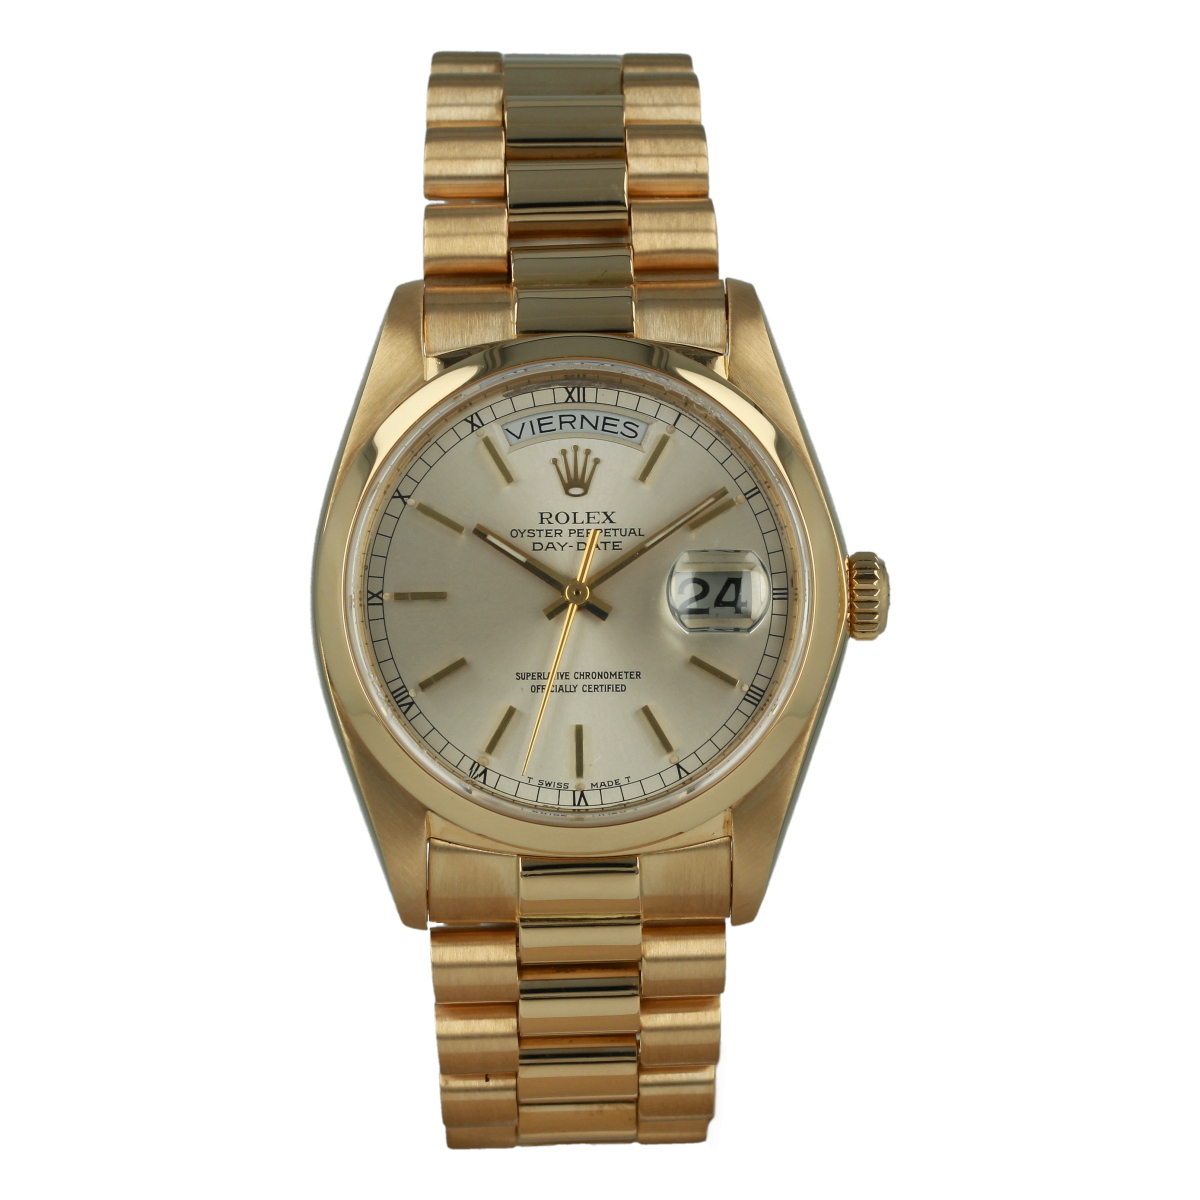 Rolex Day-Date 18028 36mm Yellow Gold Champagne Dial (circa 1980) | Buy pre-owned Rolex watch